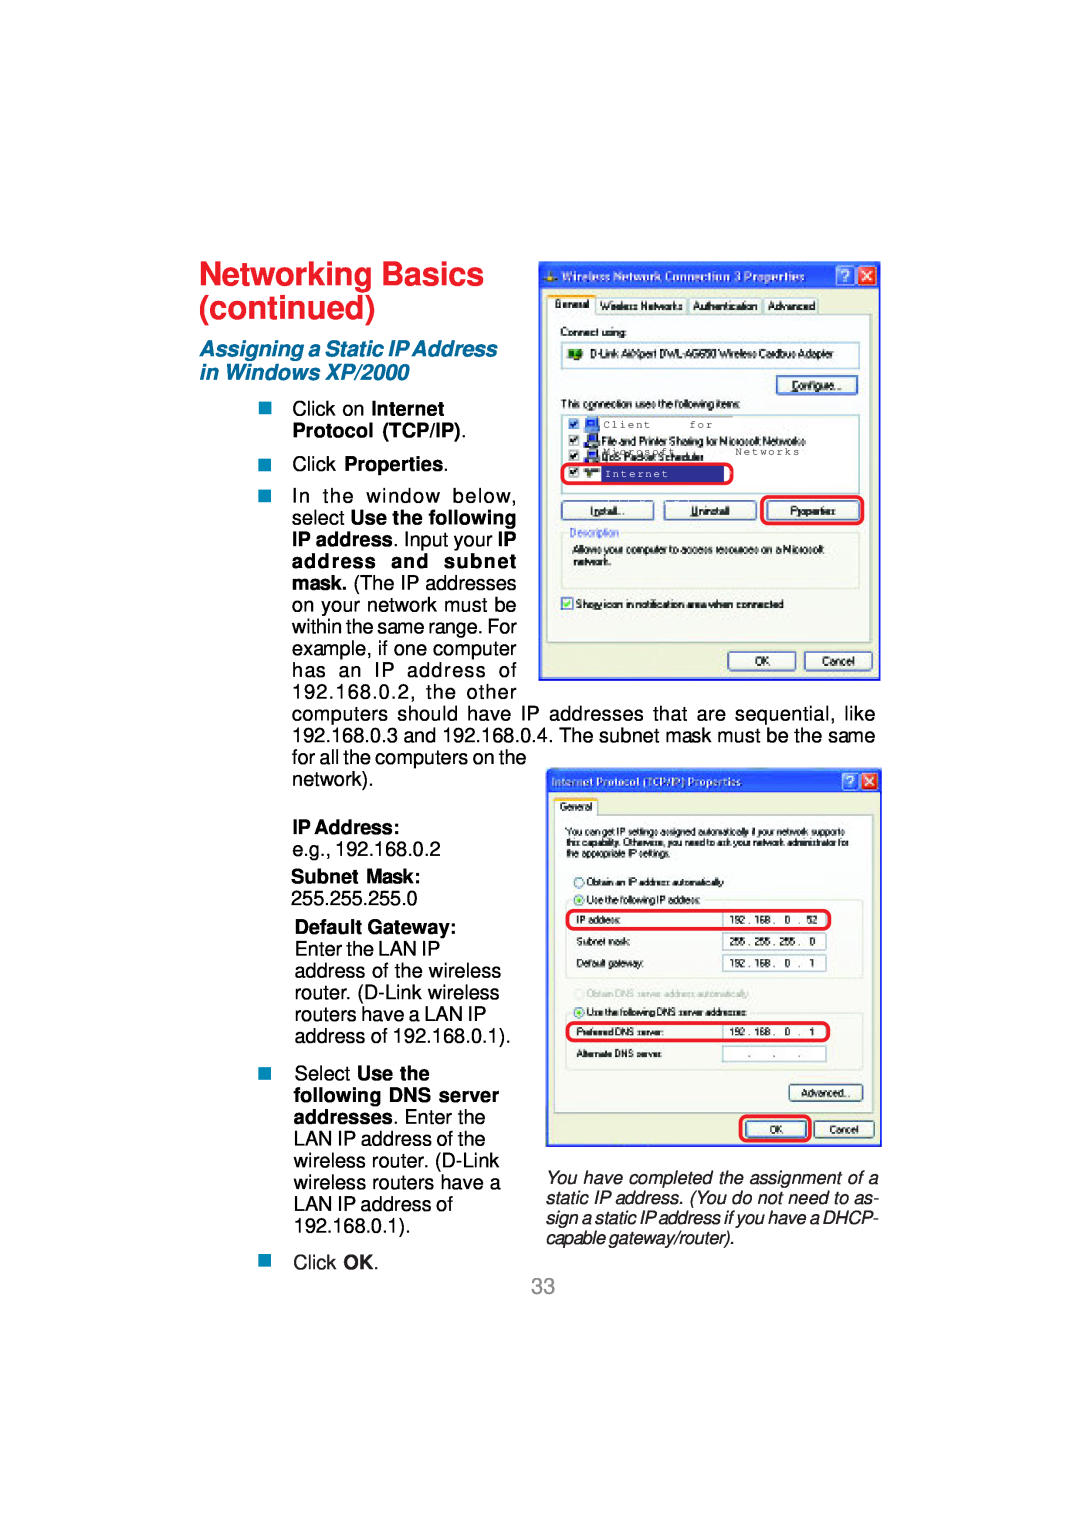 D-Link DWL-AG530 manual Networking Basics continued, Assigning a Static IP Address in Windows XP/2000, „ Click Properties 